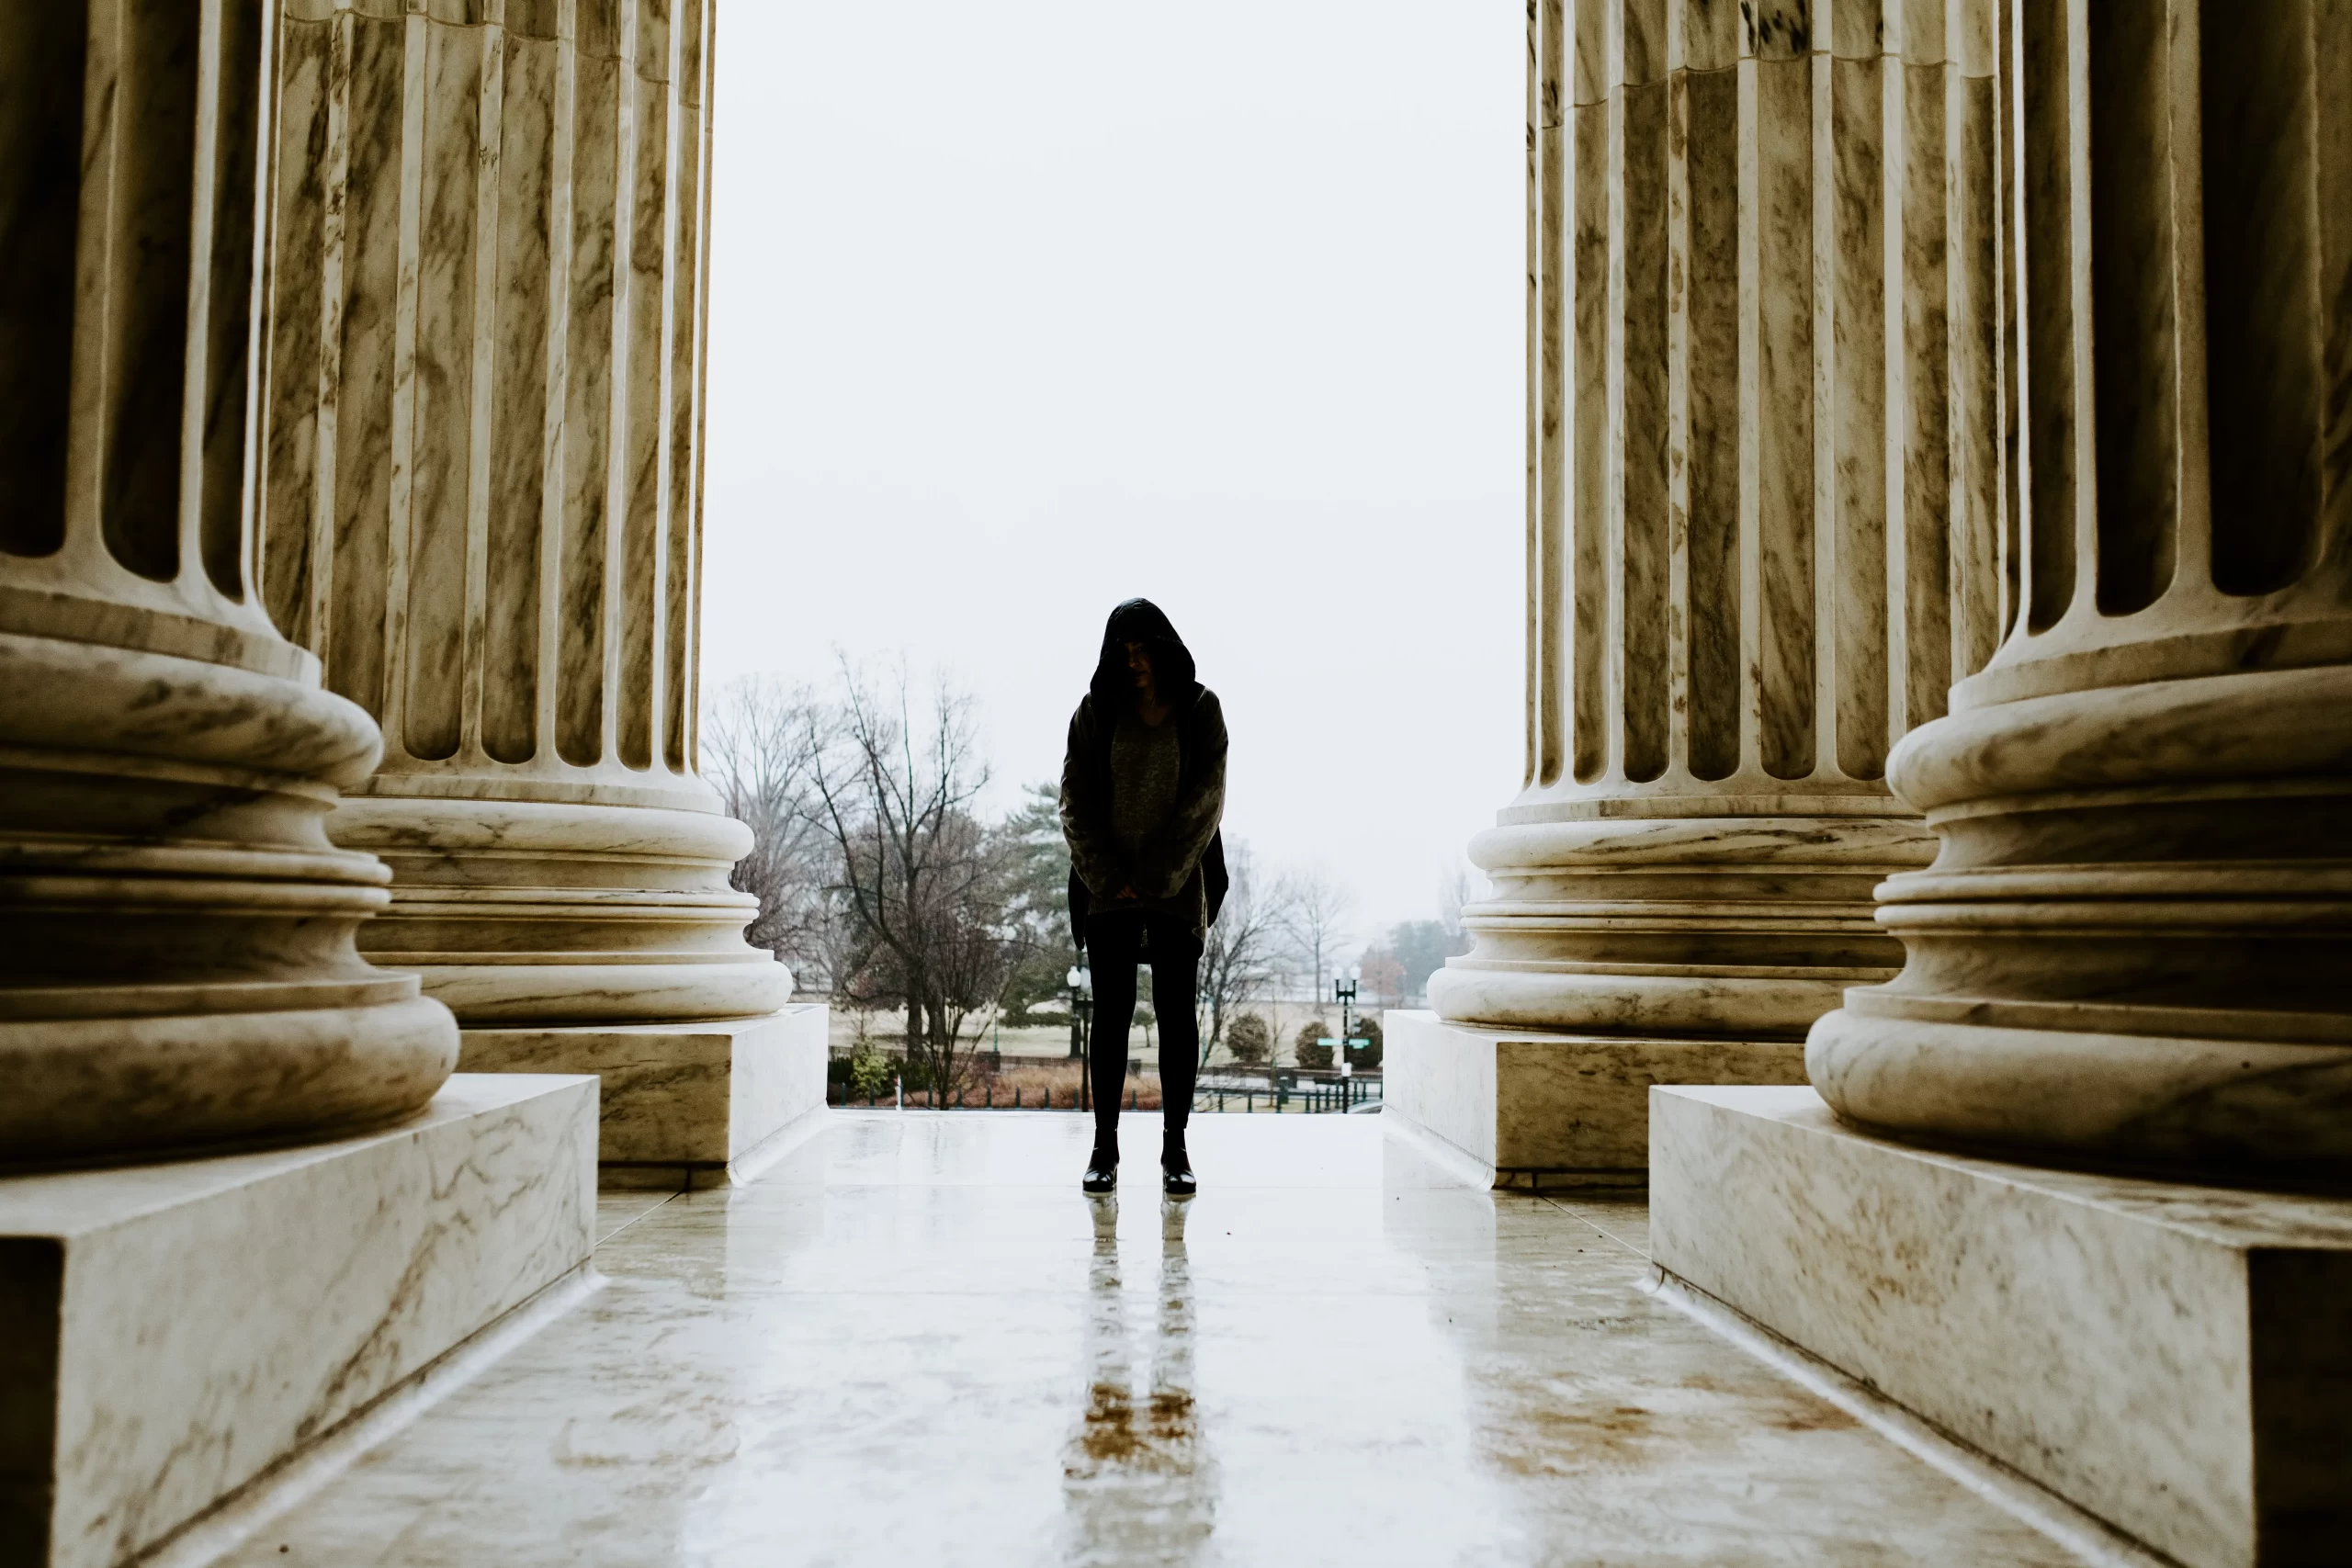 zach-camp-Woman standing between the supreme court columns outside building -unsplash